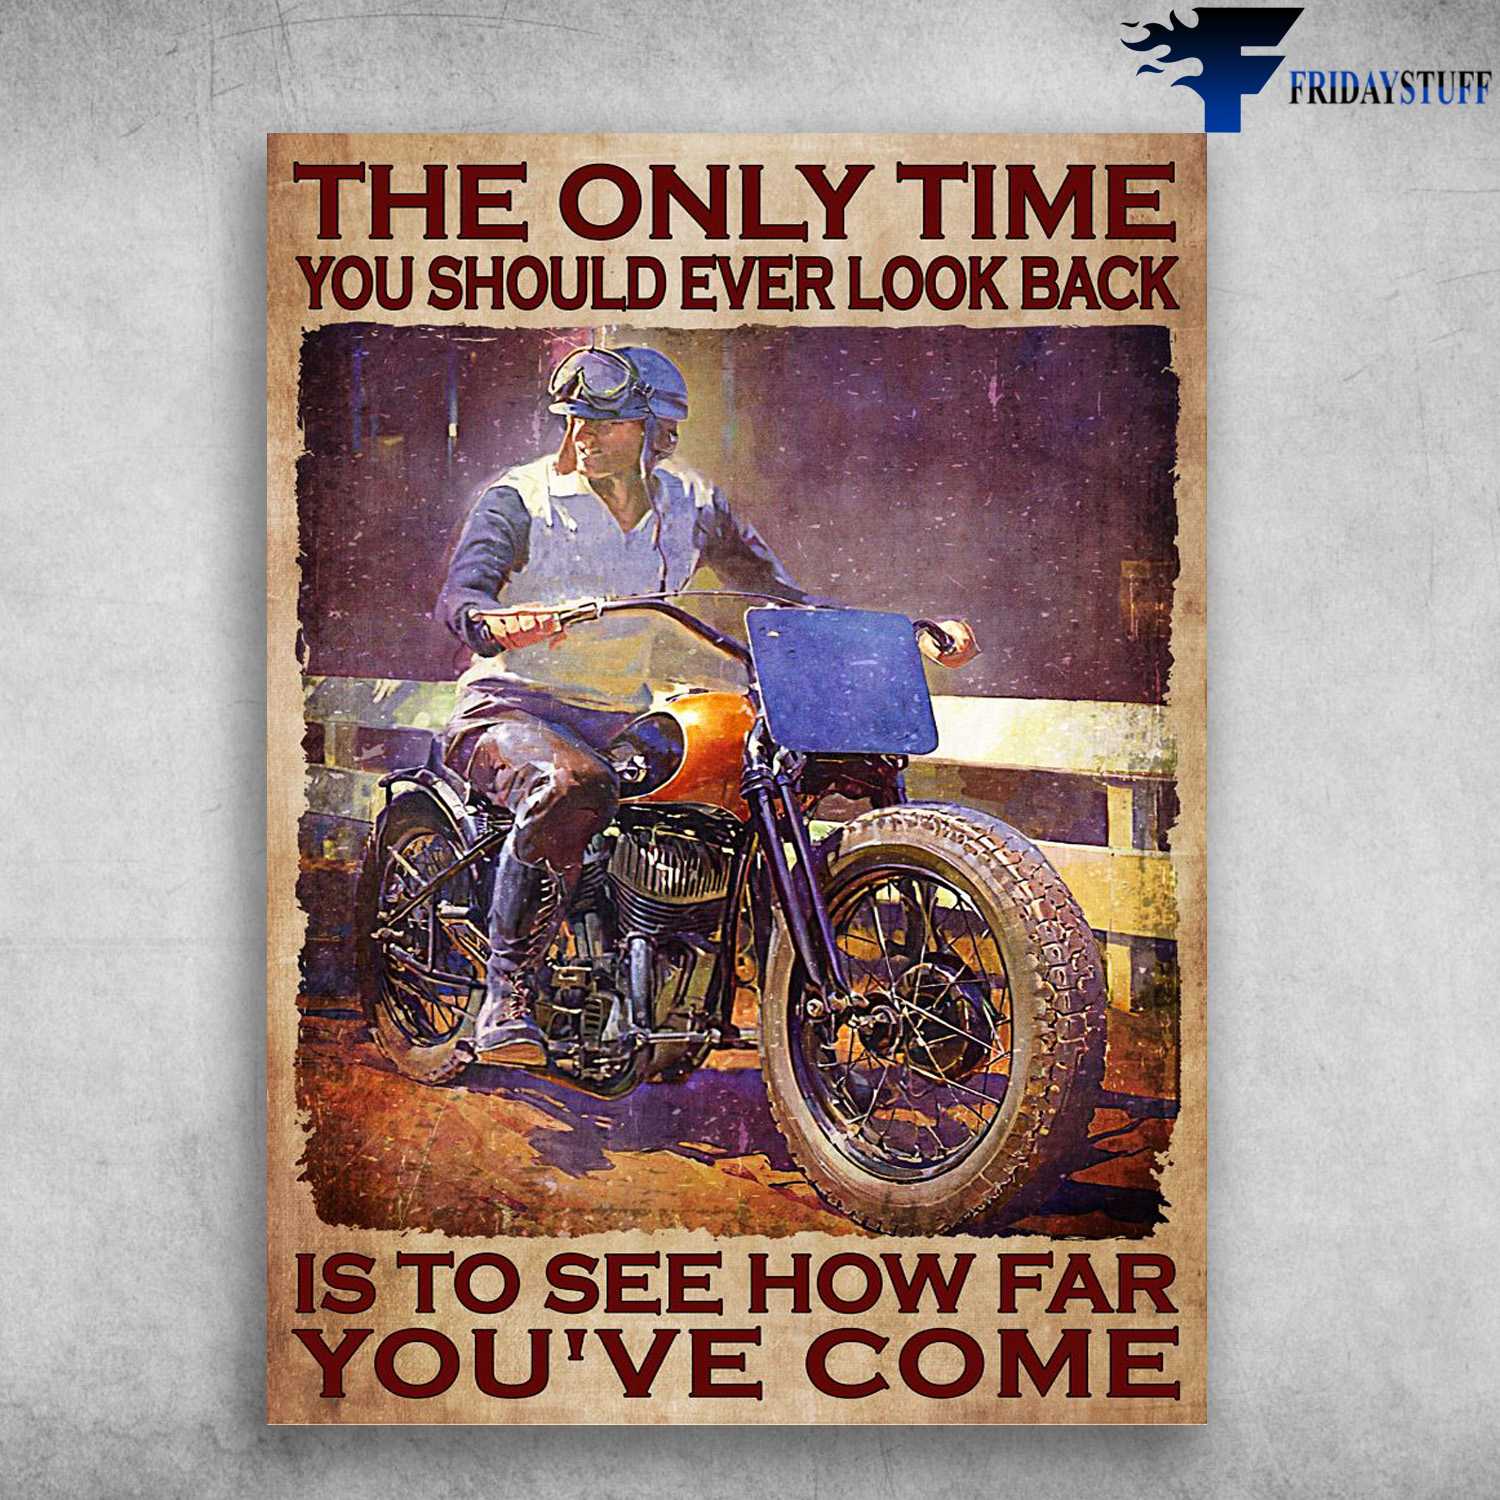 Motorcycle Man, Biker Motorbike - The Only Time You Should Ever Look Back, Is To See How Far You've Come